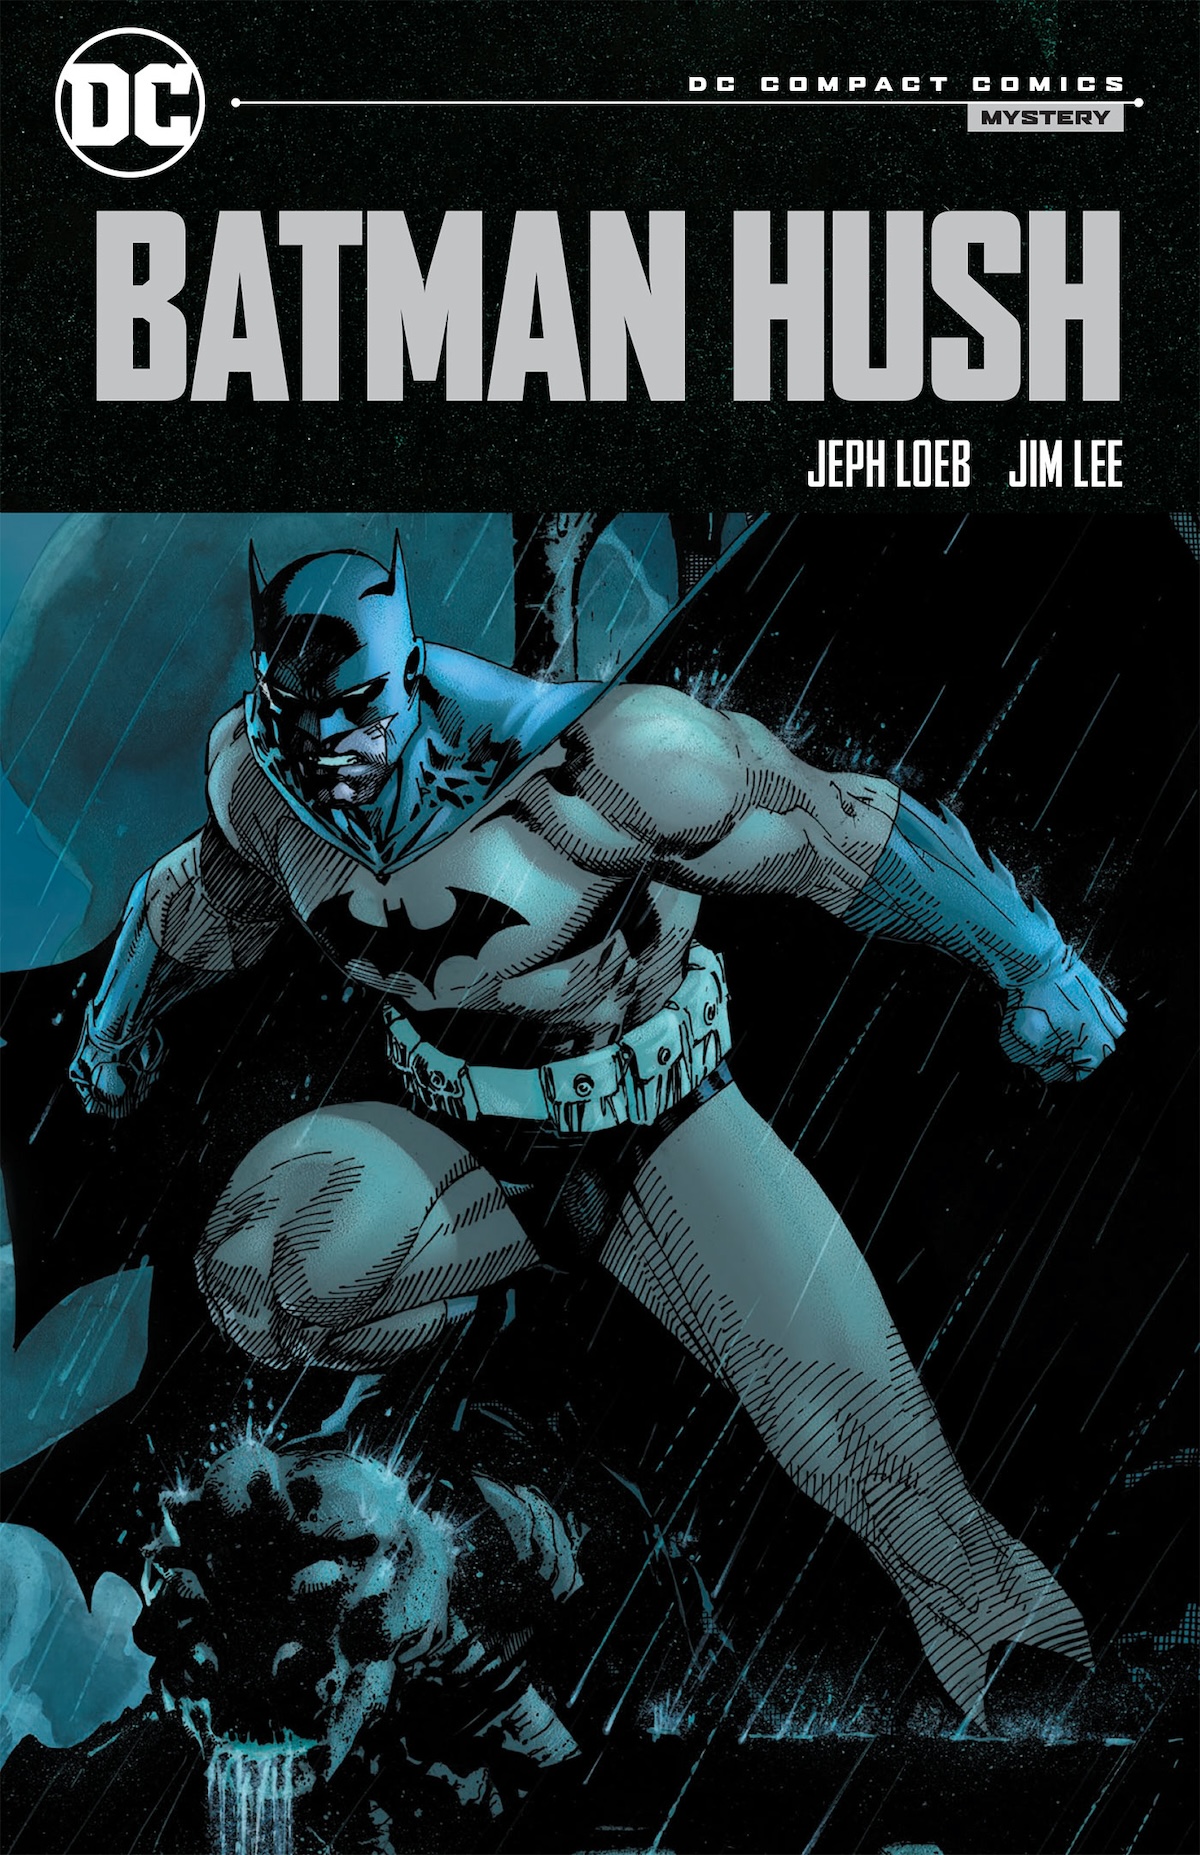 Batman: Hush by Jeph Loeb and Jim Lee cover for DC Compact Comics 